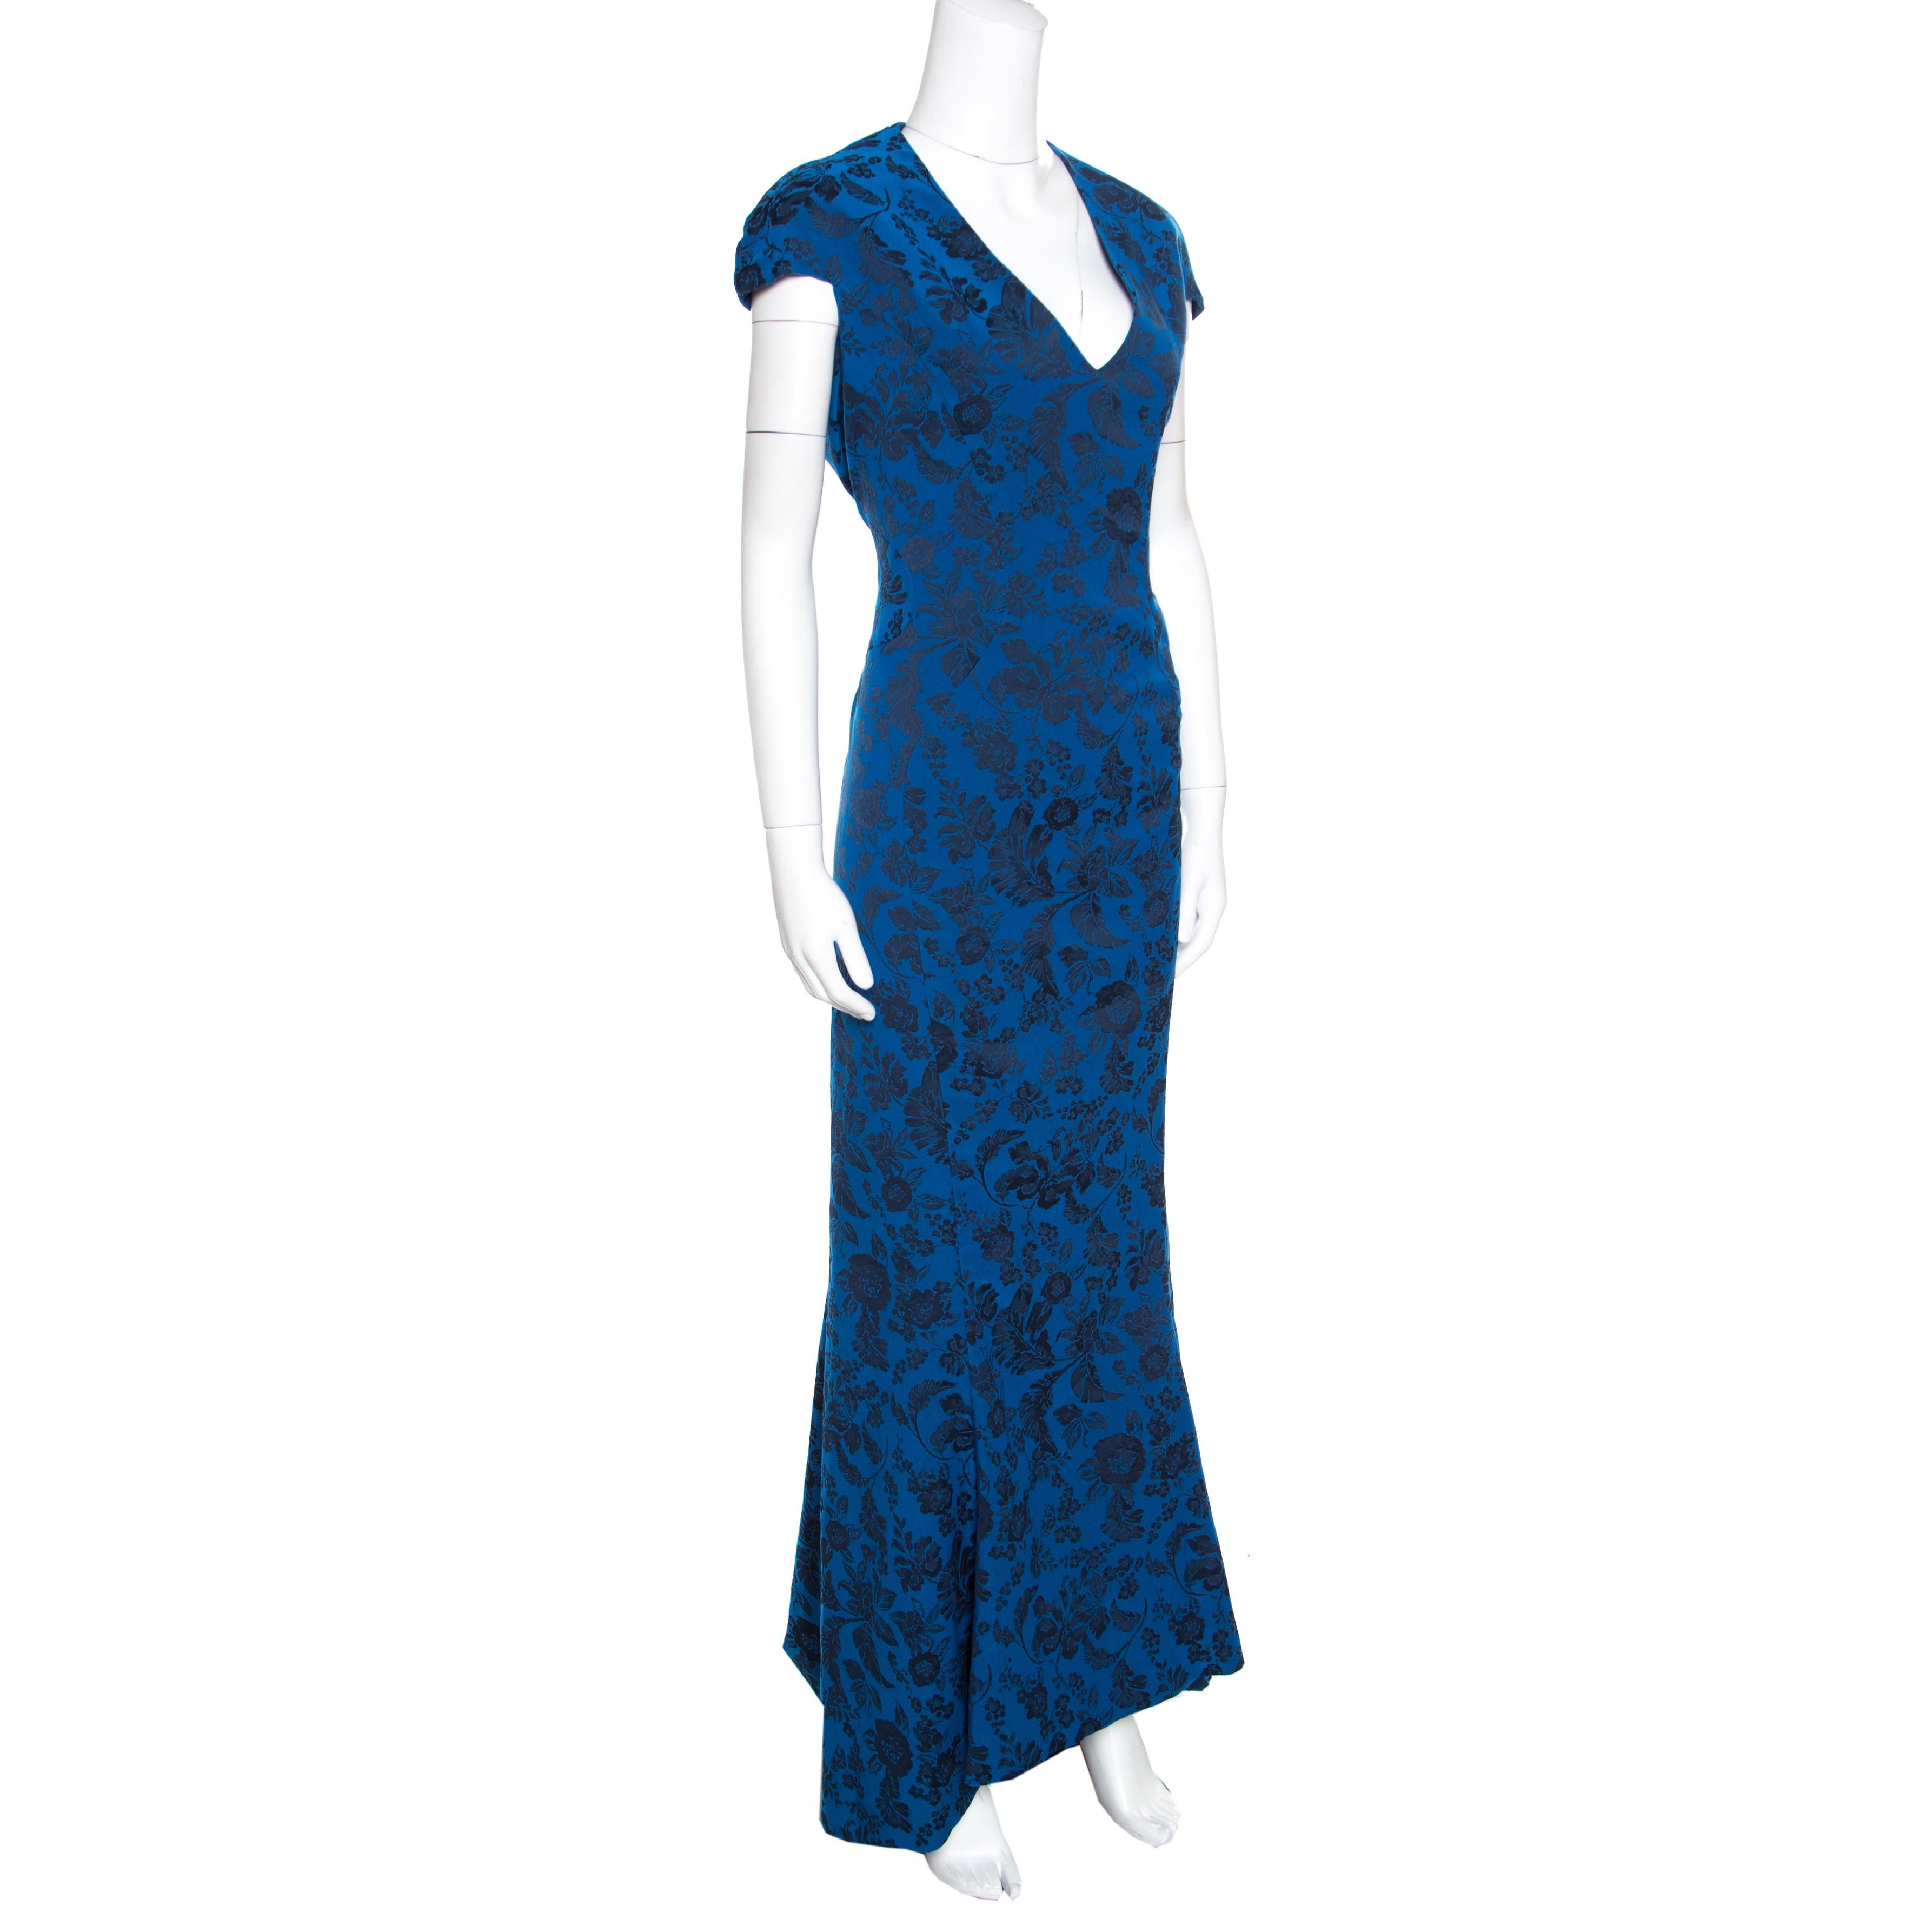 Zac Posen's mermaid gown will create a craze amongst women around the world. This blue-coloured gown is so beautiful you'll look like a dreamy vision every time you slip into it. Flaunting a floral jacquard pattern all over, the gown carries a